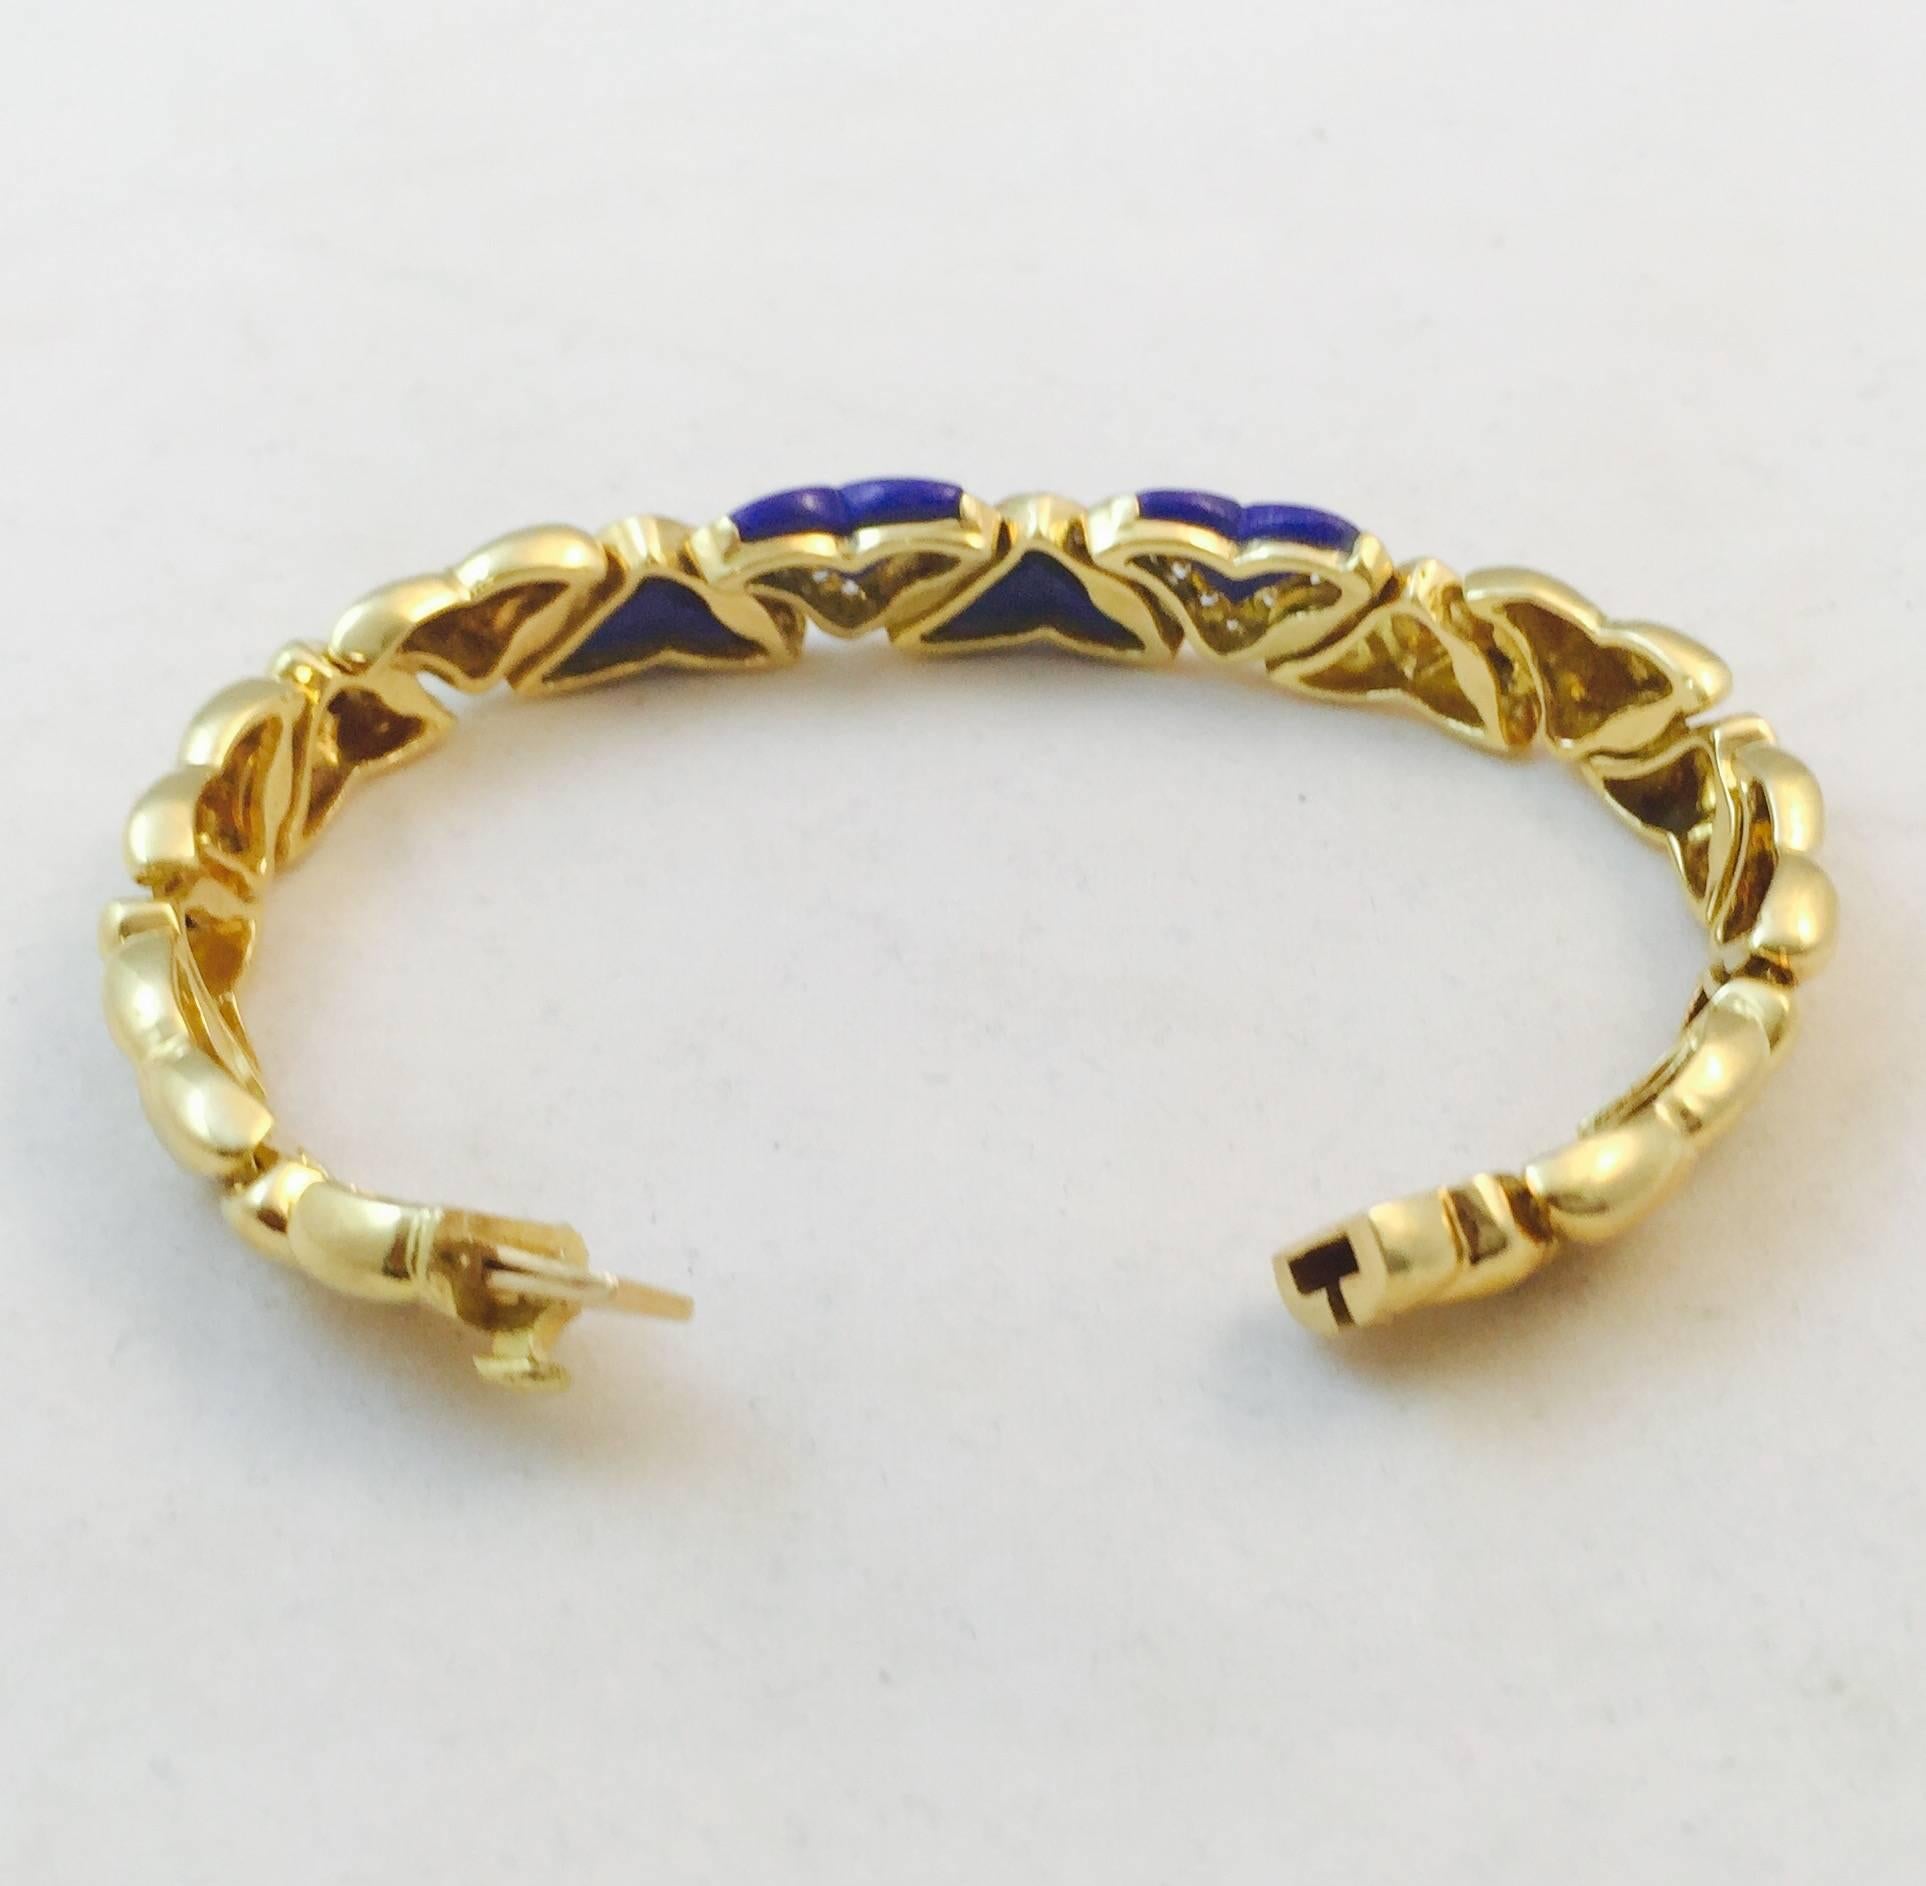 Since 1936, Fred of Paris has been adorning ladies world wide.  His most famous piece was featured in a scene with Julia Roberts in Pretty Woman!  Grace Kelly was a fan!  Meticulously crafted in 18K yellow gold, this stunning bracelet features heart